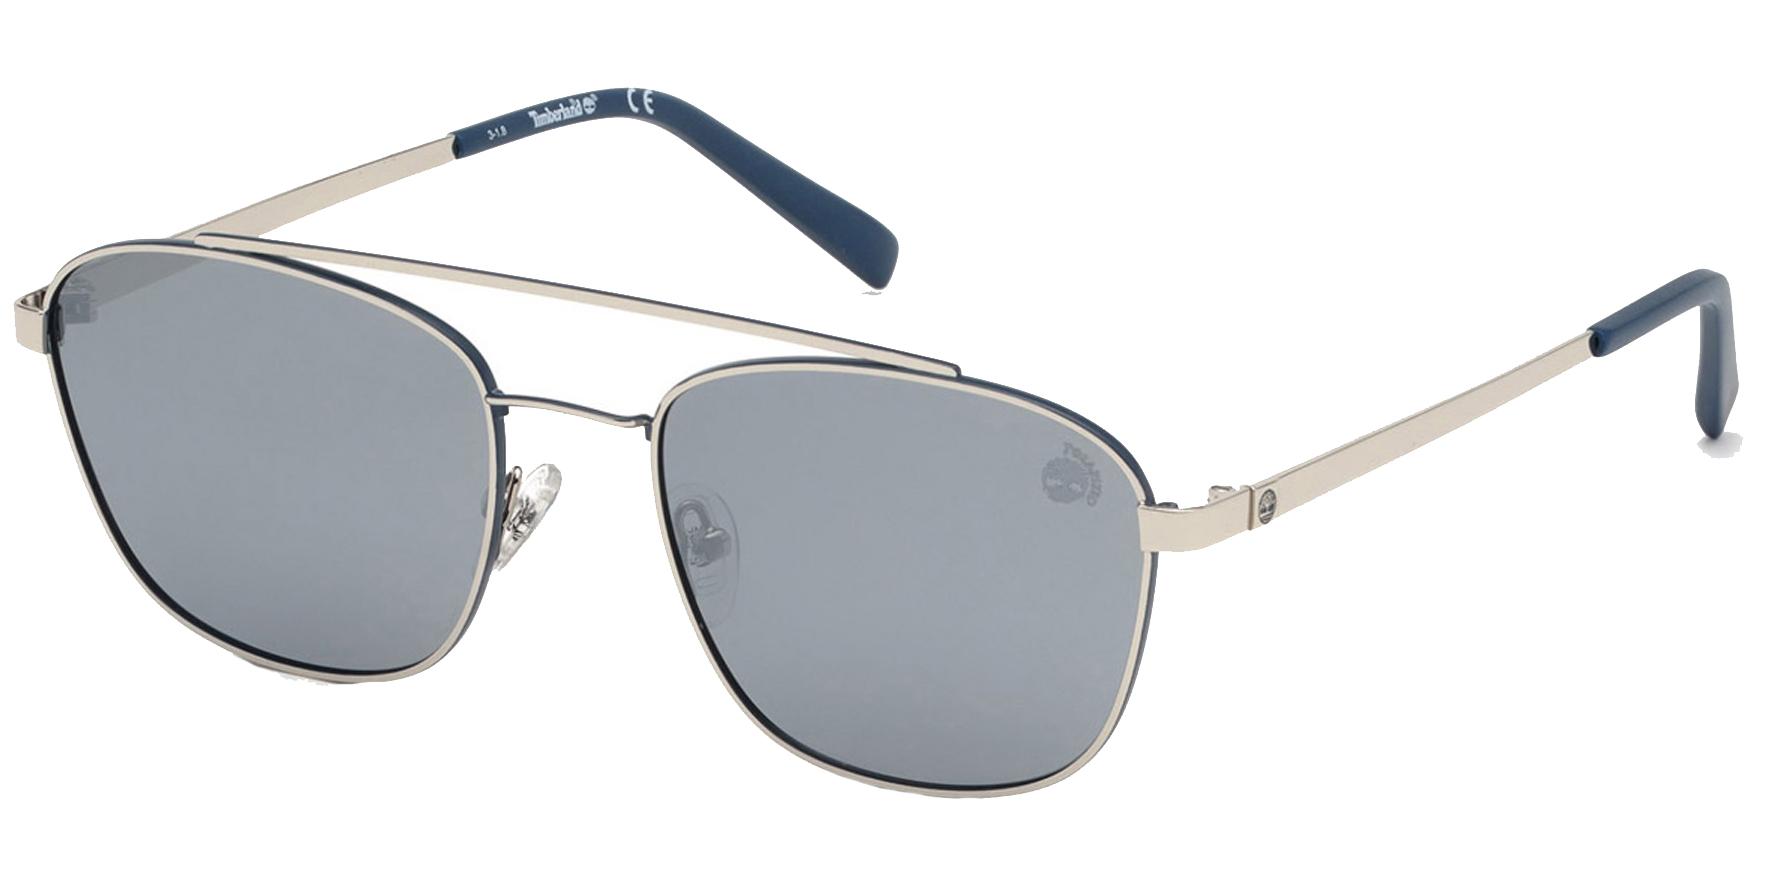 Timberland Polarized Sunglasses for $20 Shipped